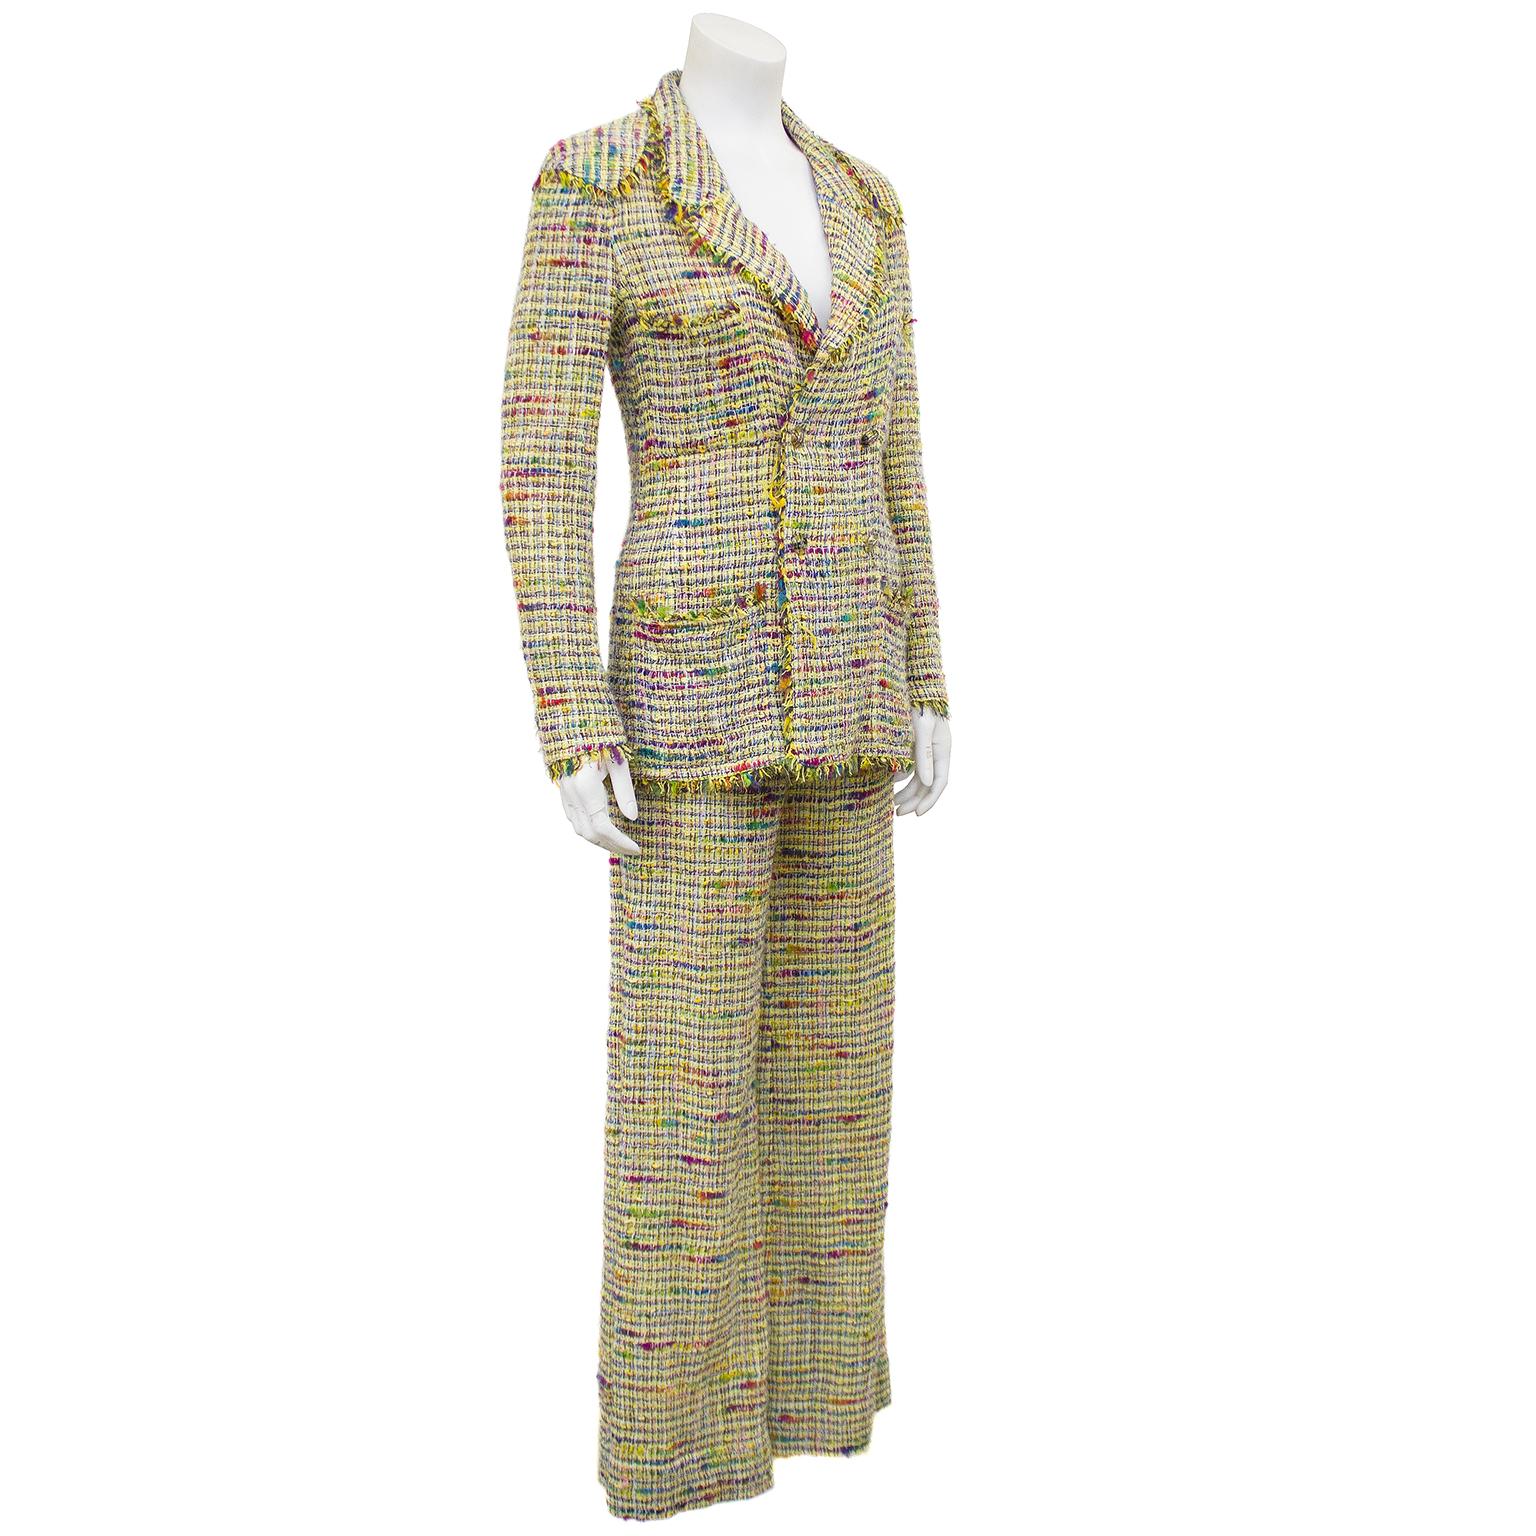 Early 2000s Chanel yellow and red boucle pants suit. The double breasted jacket has fringe along the lapel, epaulettes, pockets, front, hem and cuffs. The buttons are clear plexi discs with colored thread and silver CCs. Four front patch pockets;